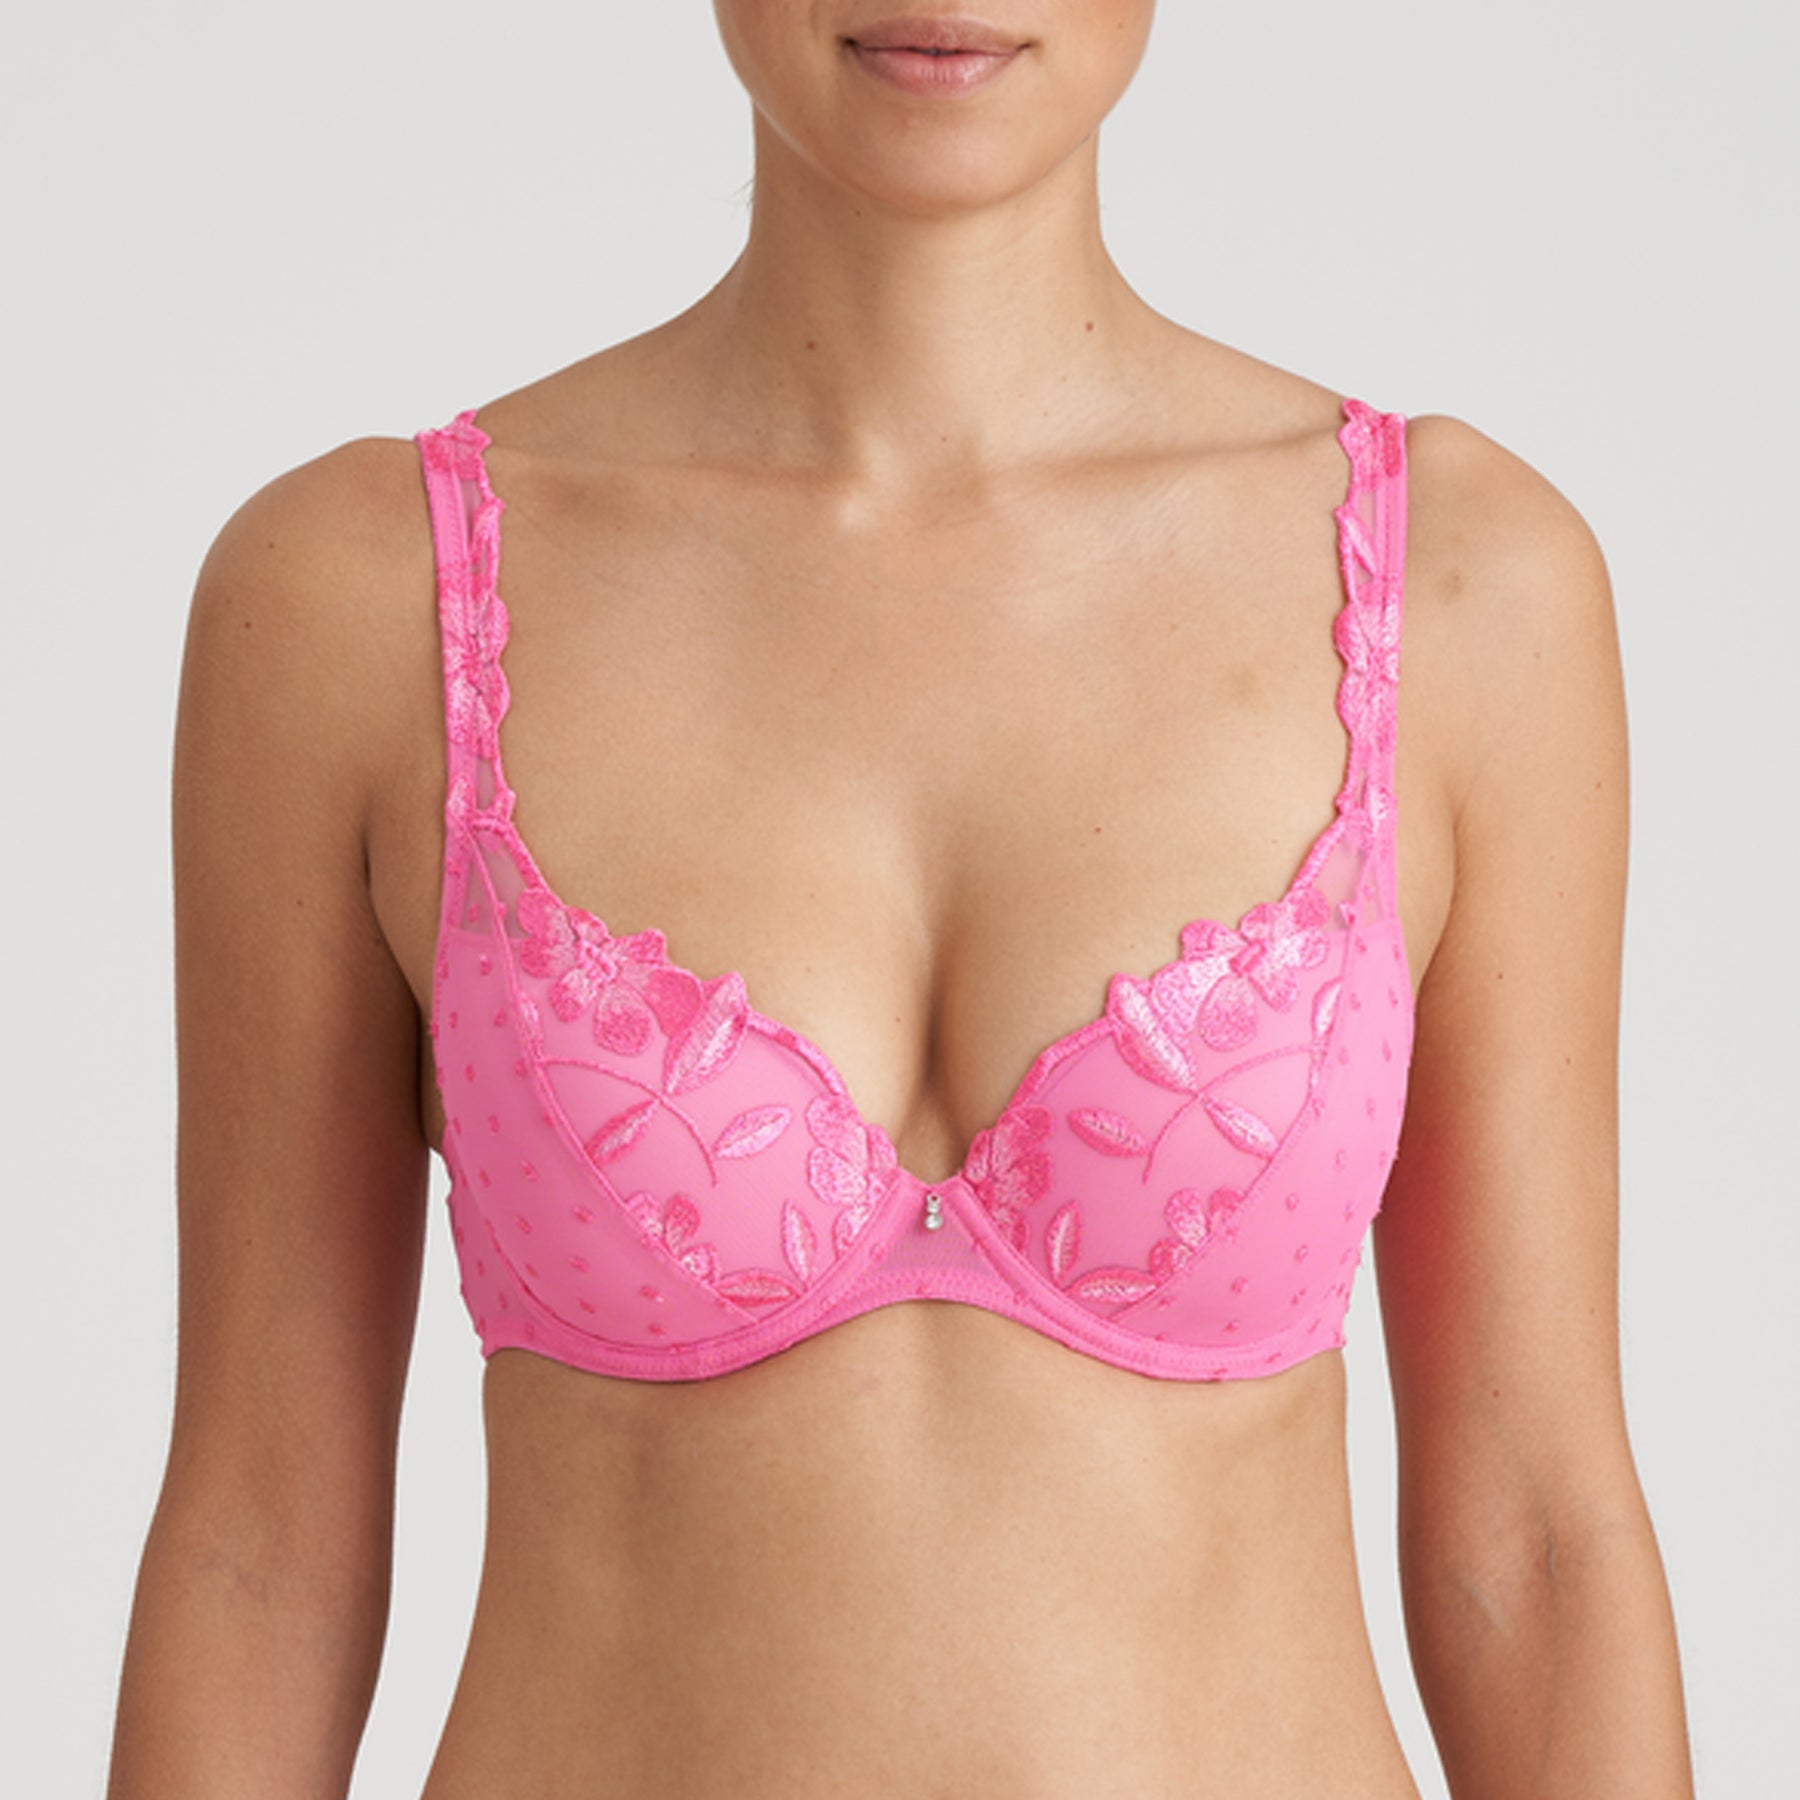 M&S BOUTIQUE JOY LACE UNDERWIRED, NON PADDED FULL CUP Bra In LIGHT PINK  Size 40A